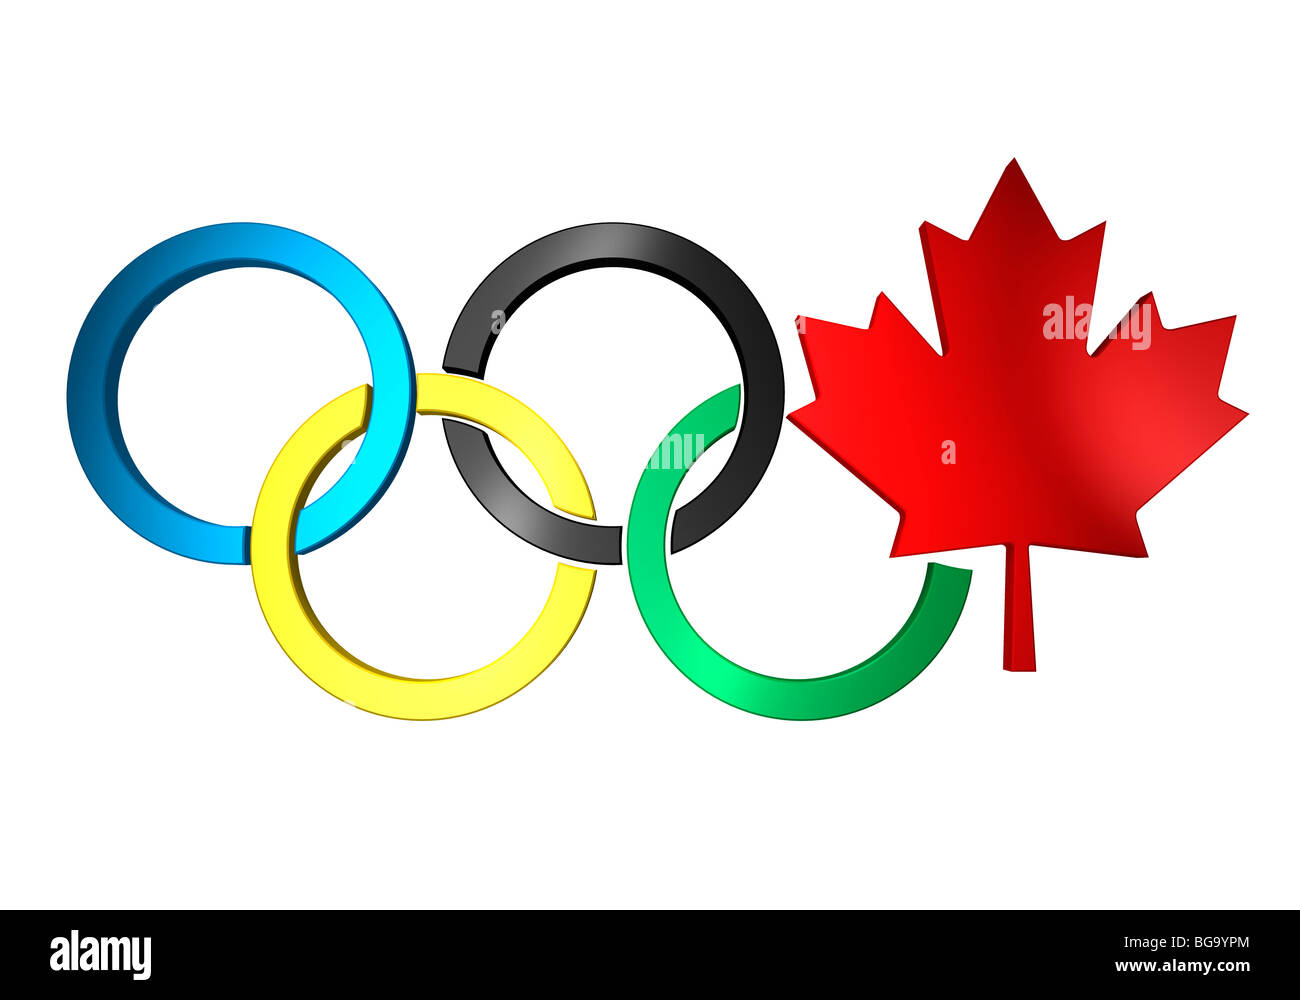 Five interlocked, colored rings make up the Olympic symbol. The rings are  blue, black, red, yellow, and - brainly.com